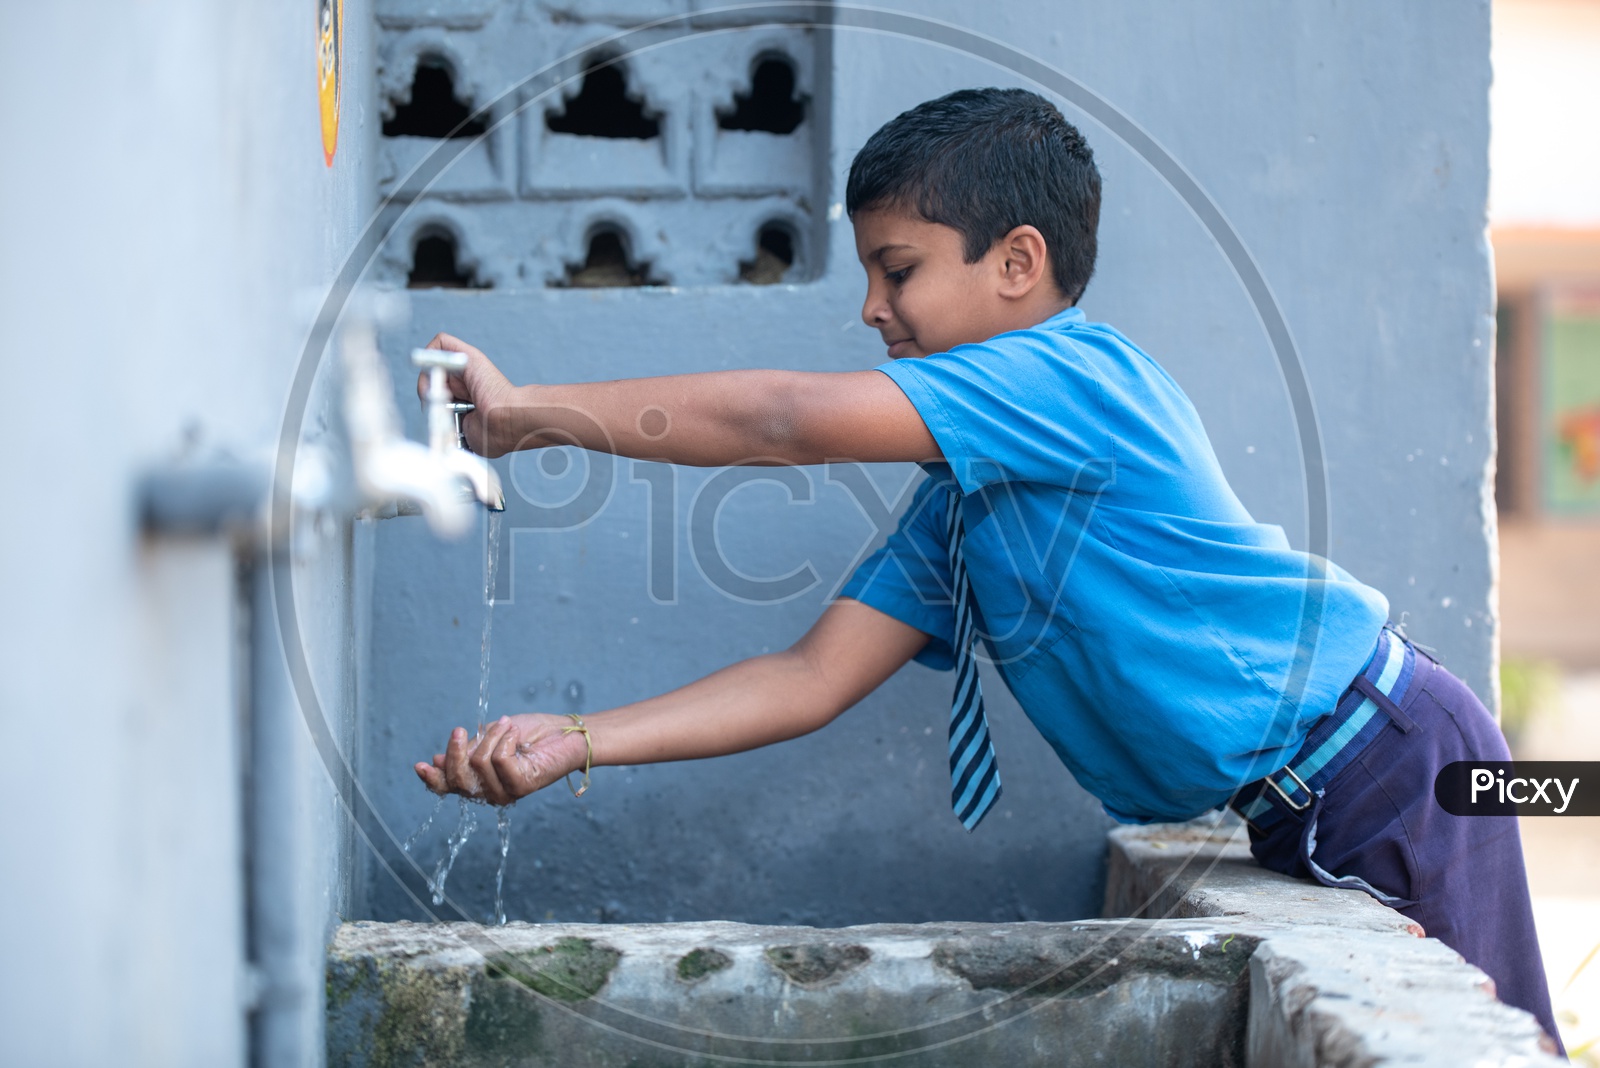 Primary government school student washing his hands at a hand wash station